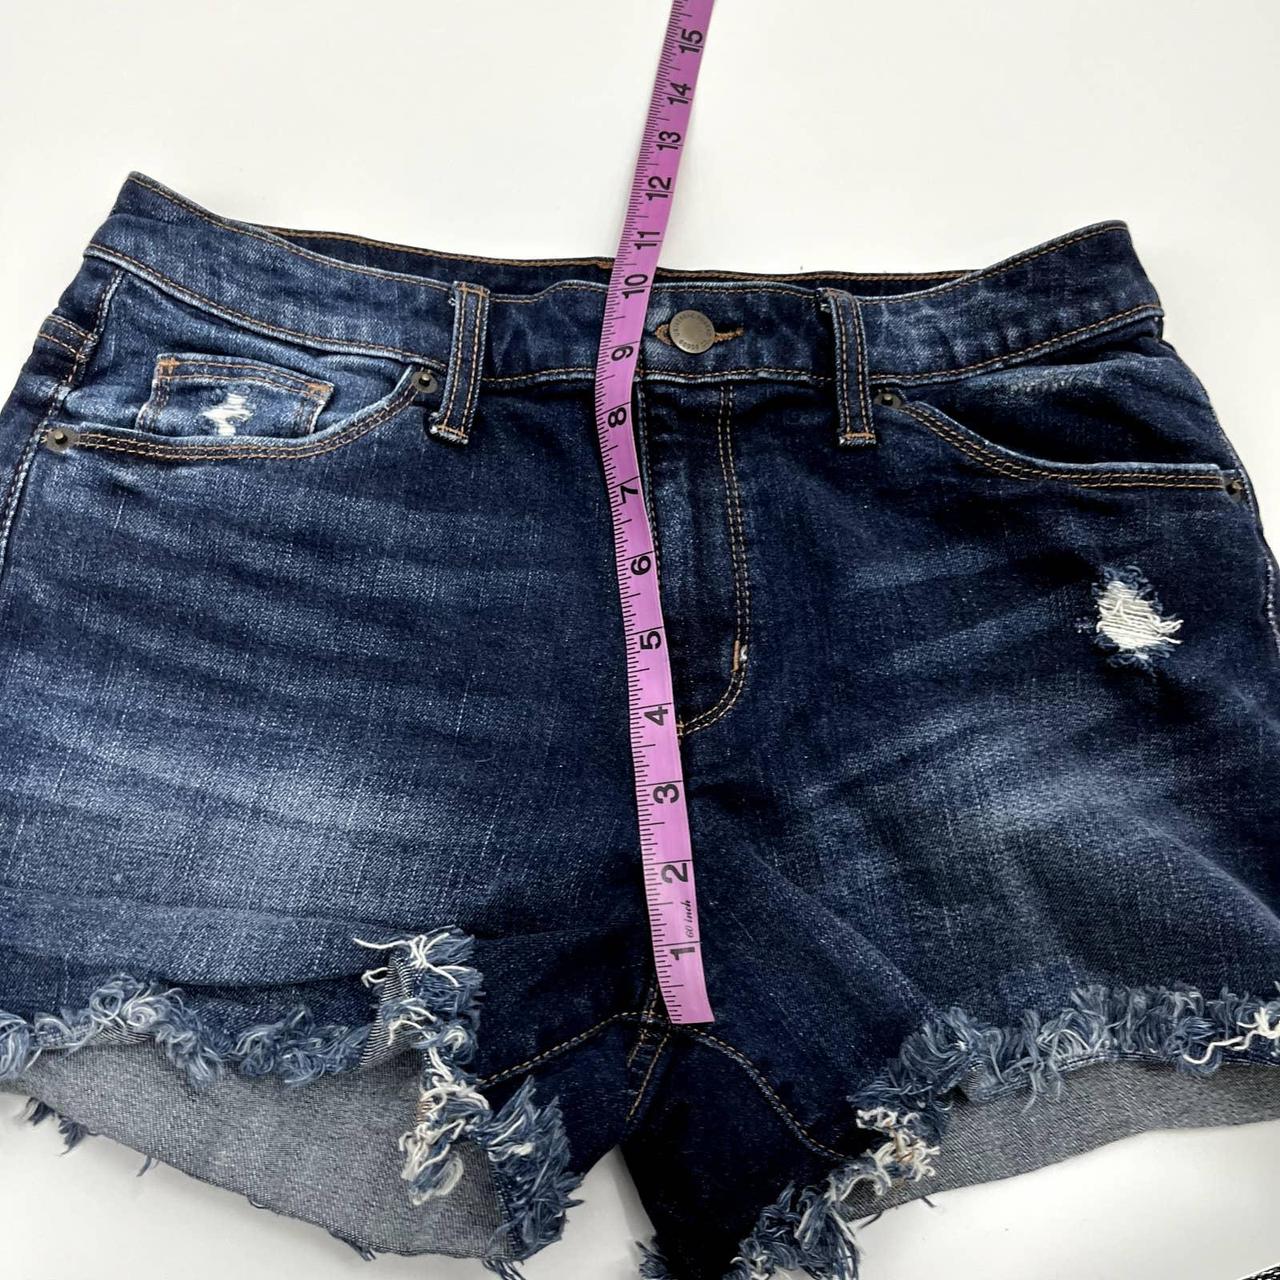 How To Make Ripped Jeans In 5 DIY Methods